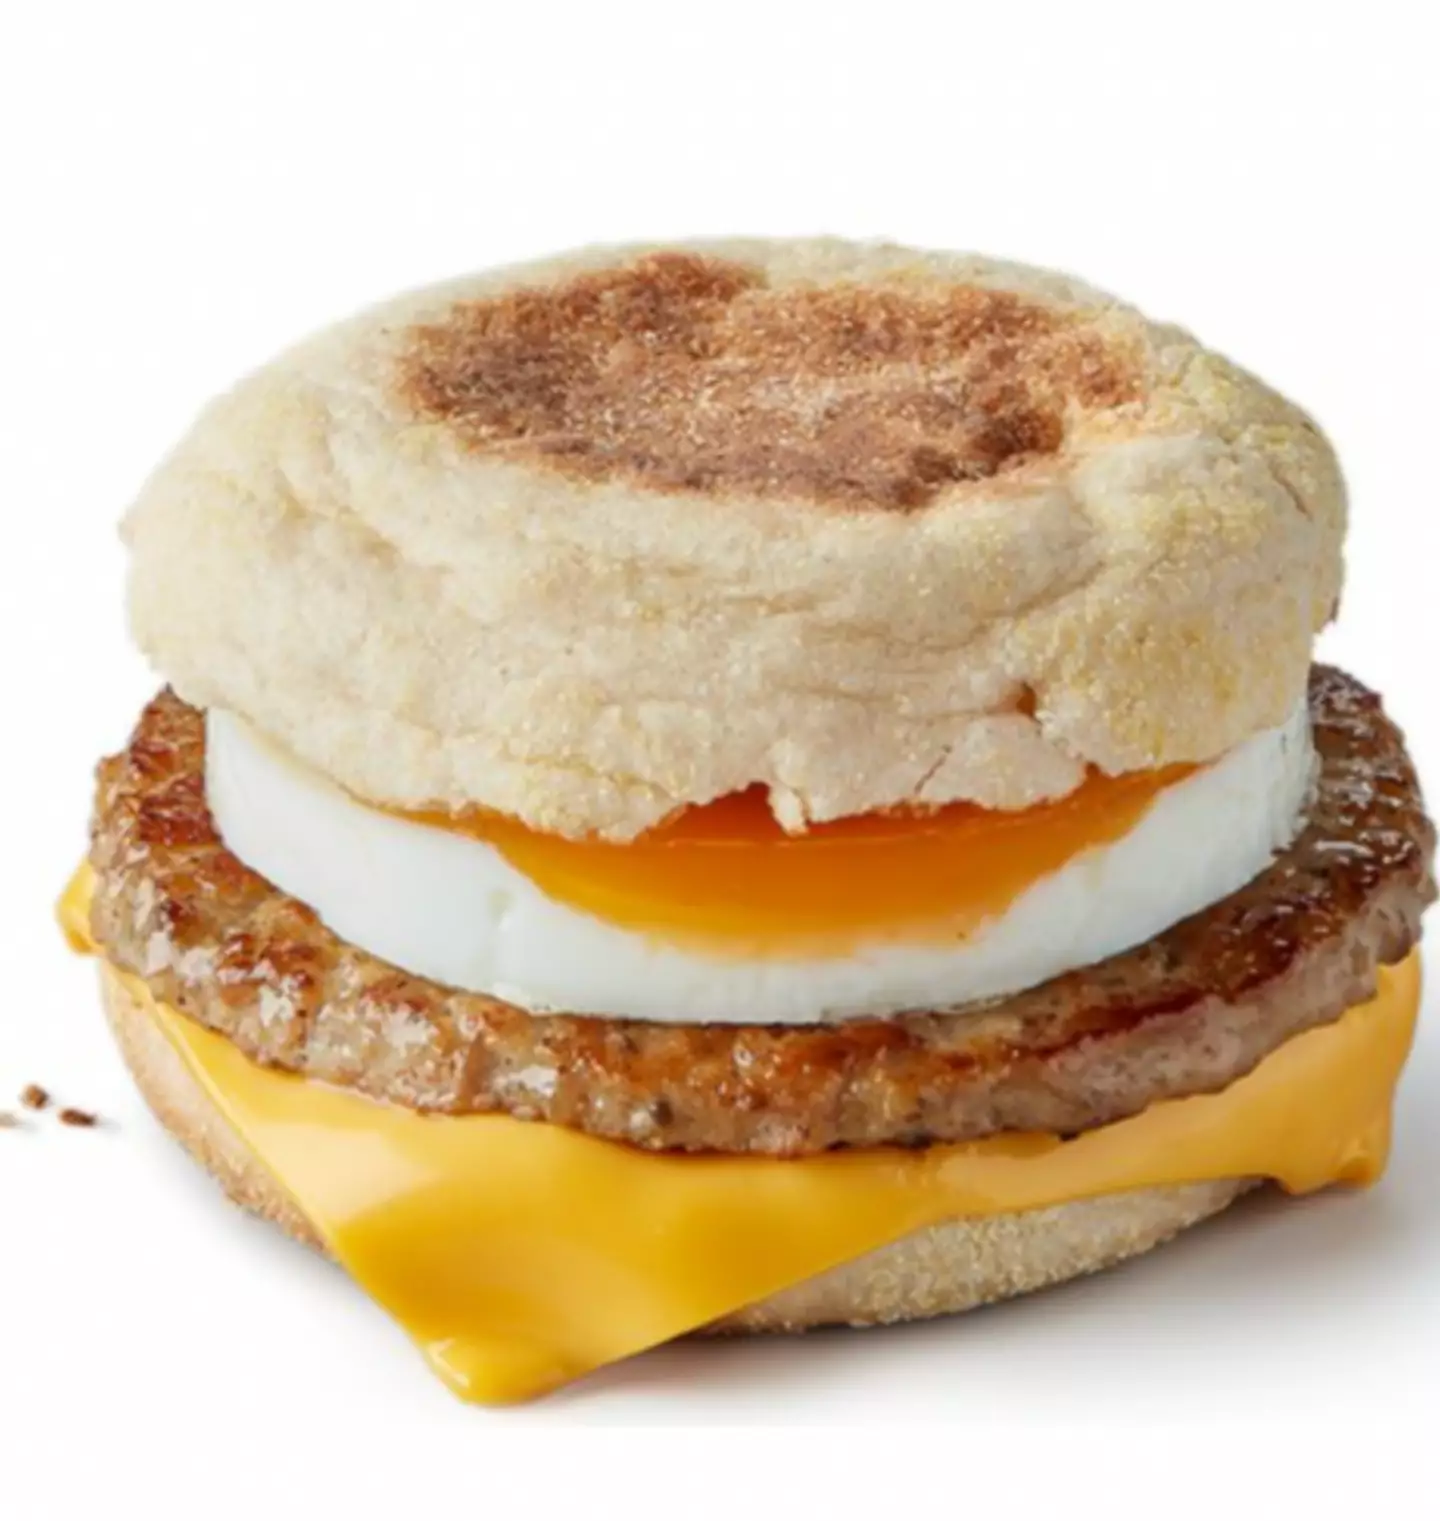 Would you want Maccies to serve breakfast all day?